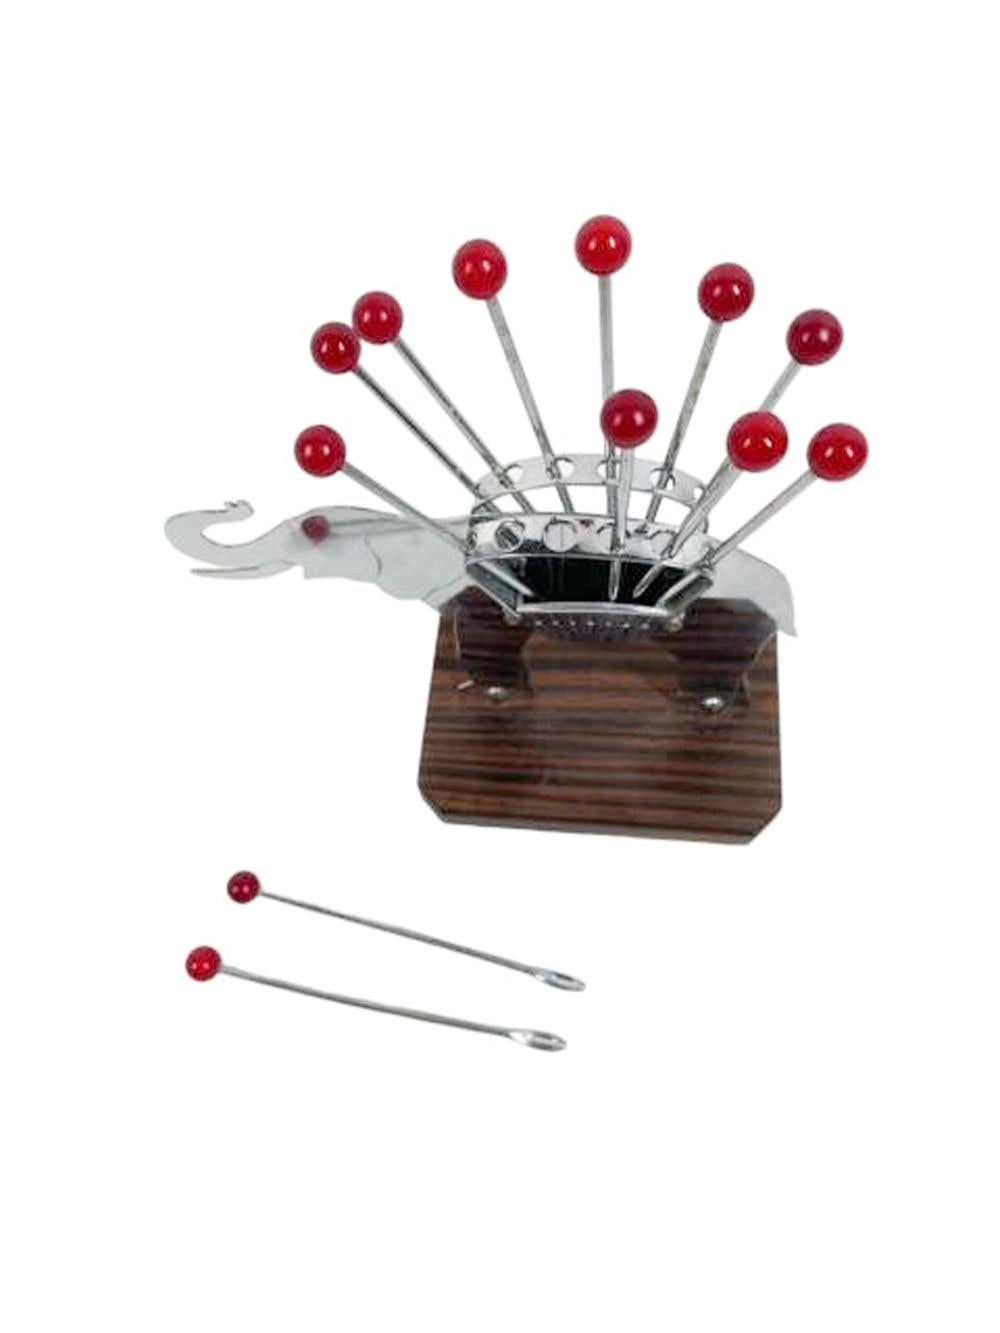 French Art Deco Elephant Cocktail Pick Set in Chrome and Wood w/12 Red Ball Top Picks